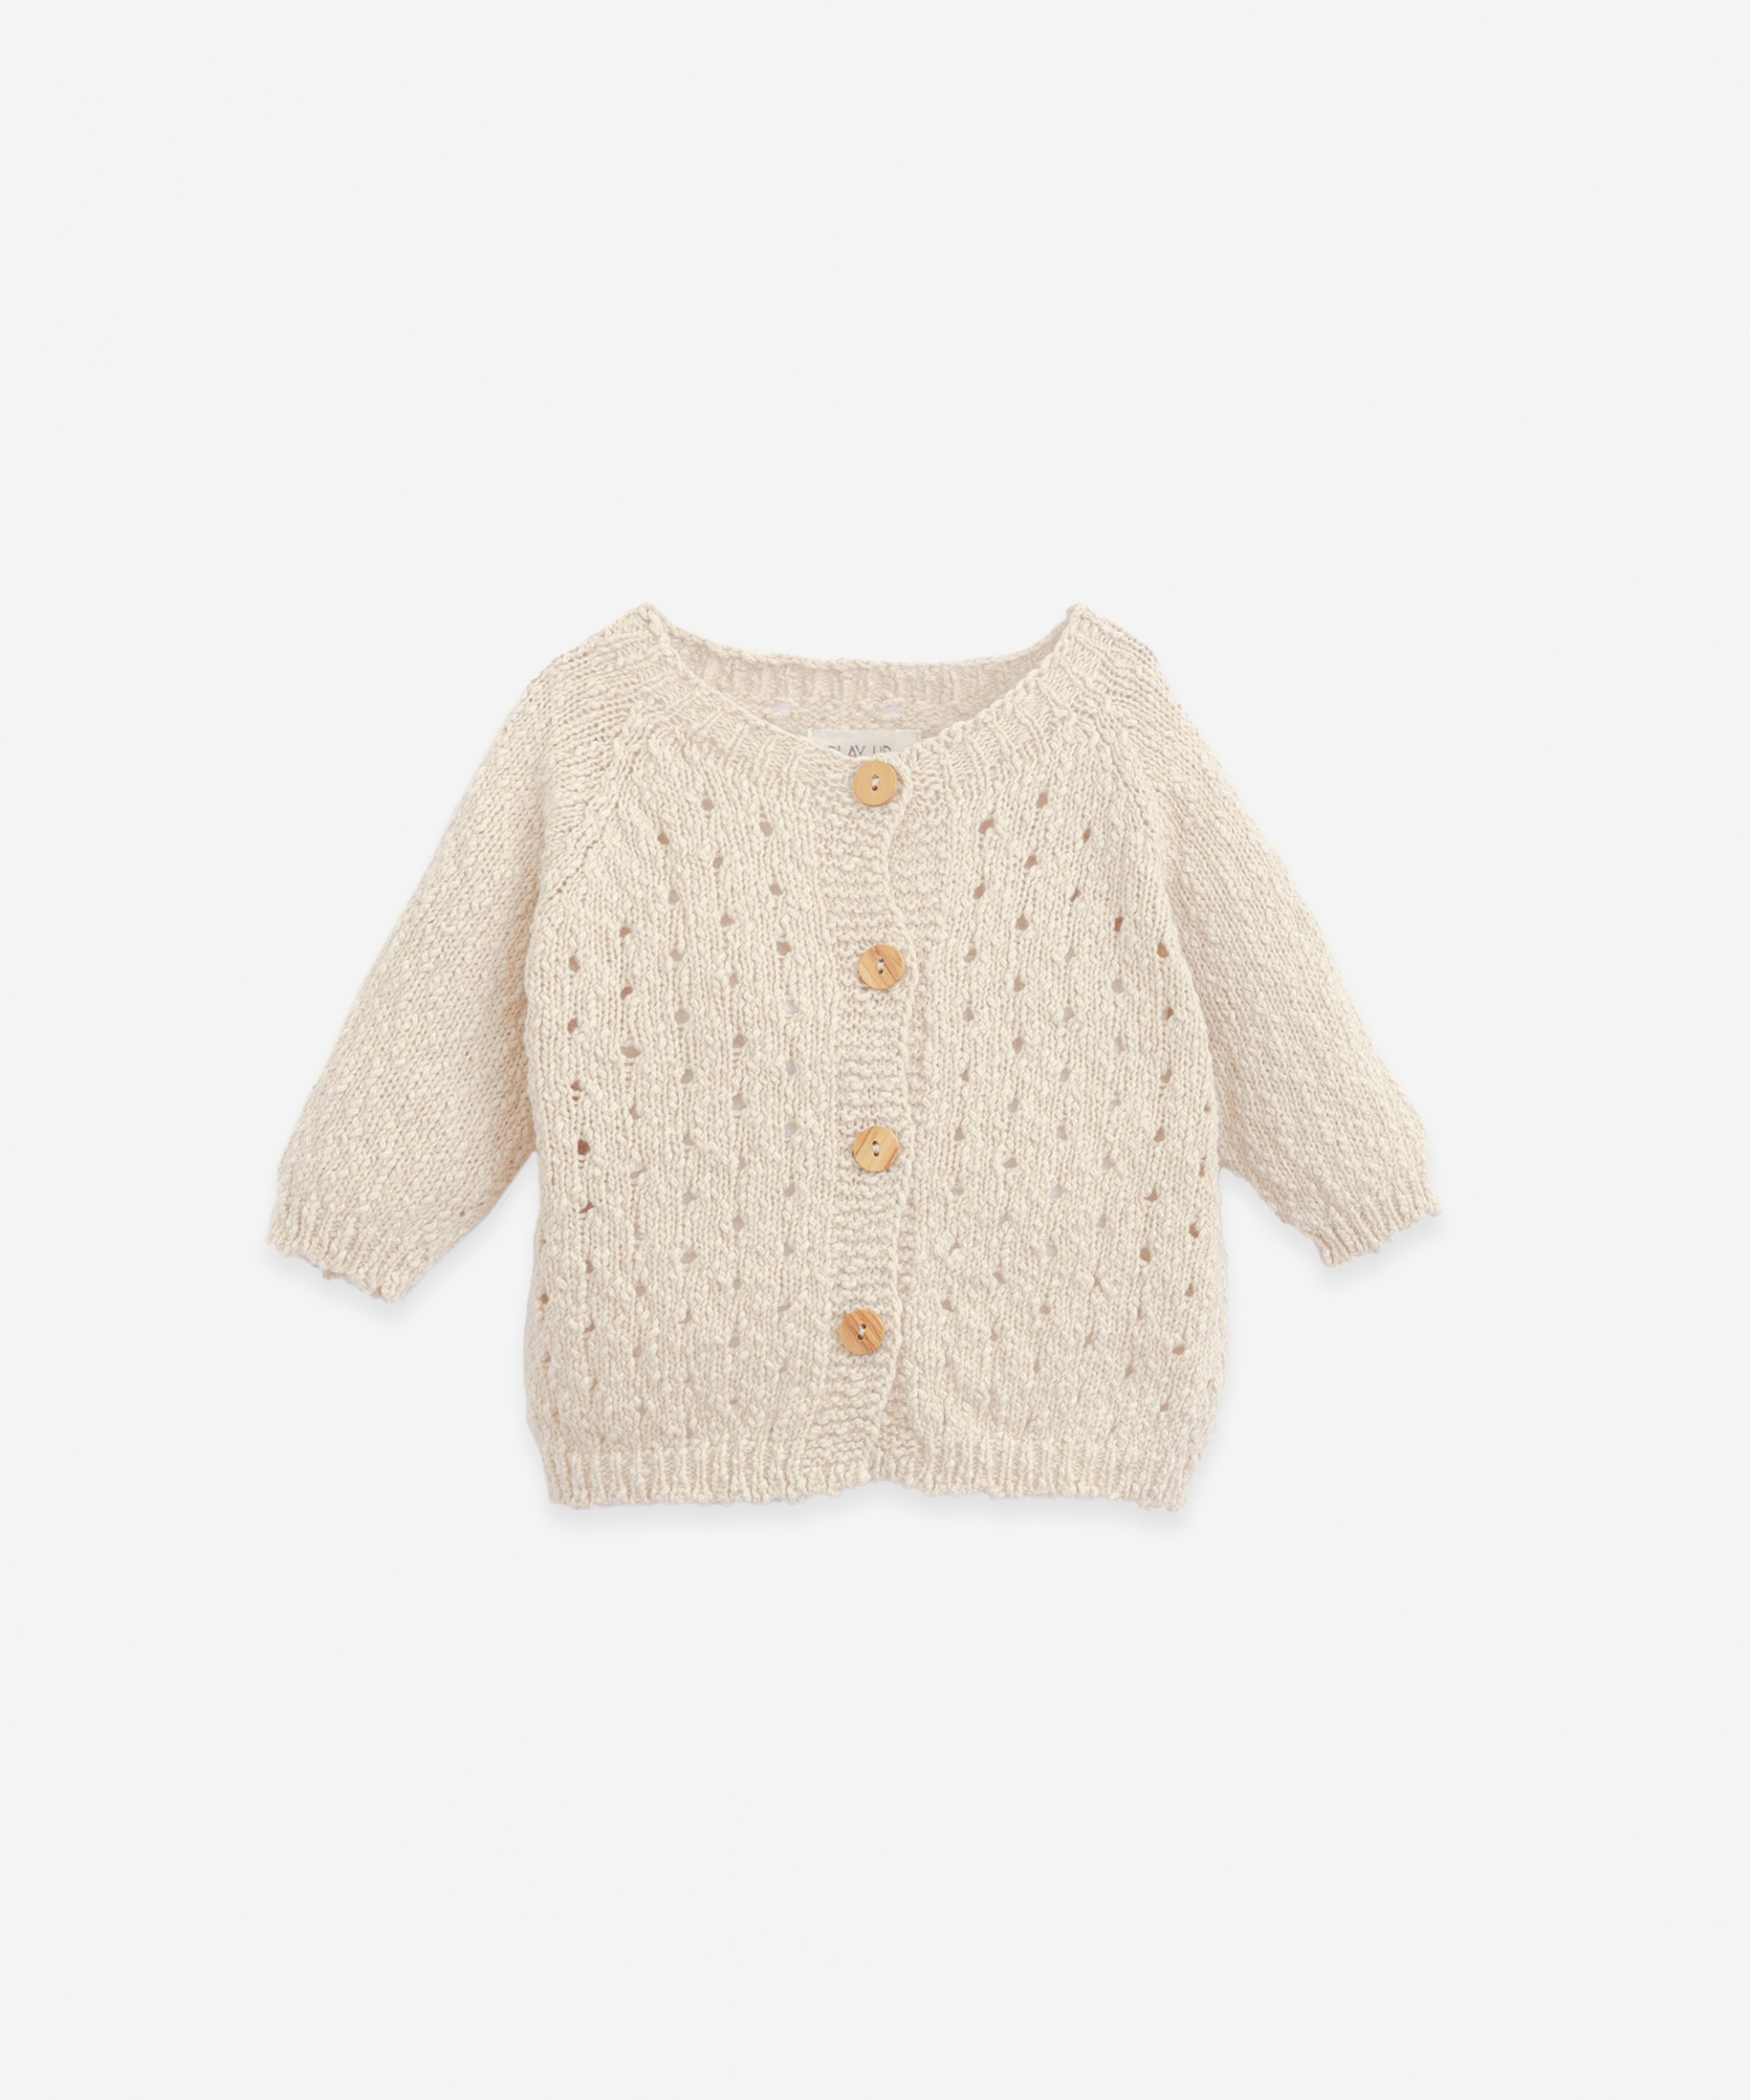 Knitted cardigan with wooden buttons | Botany